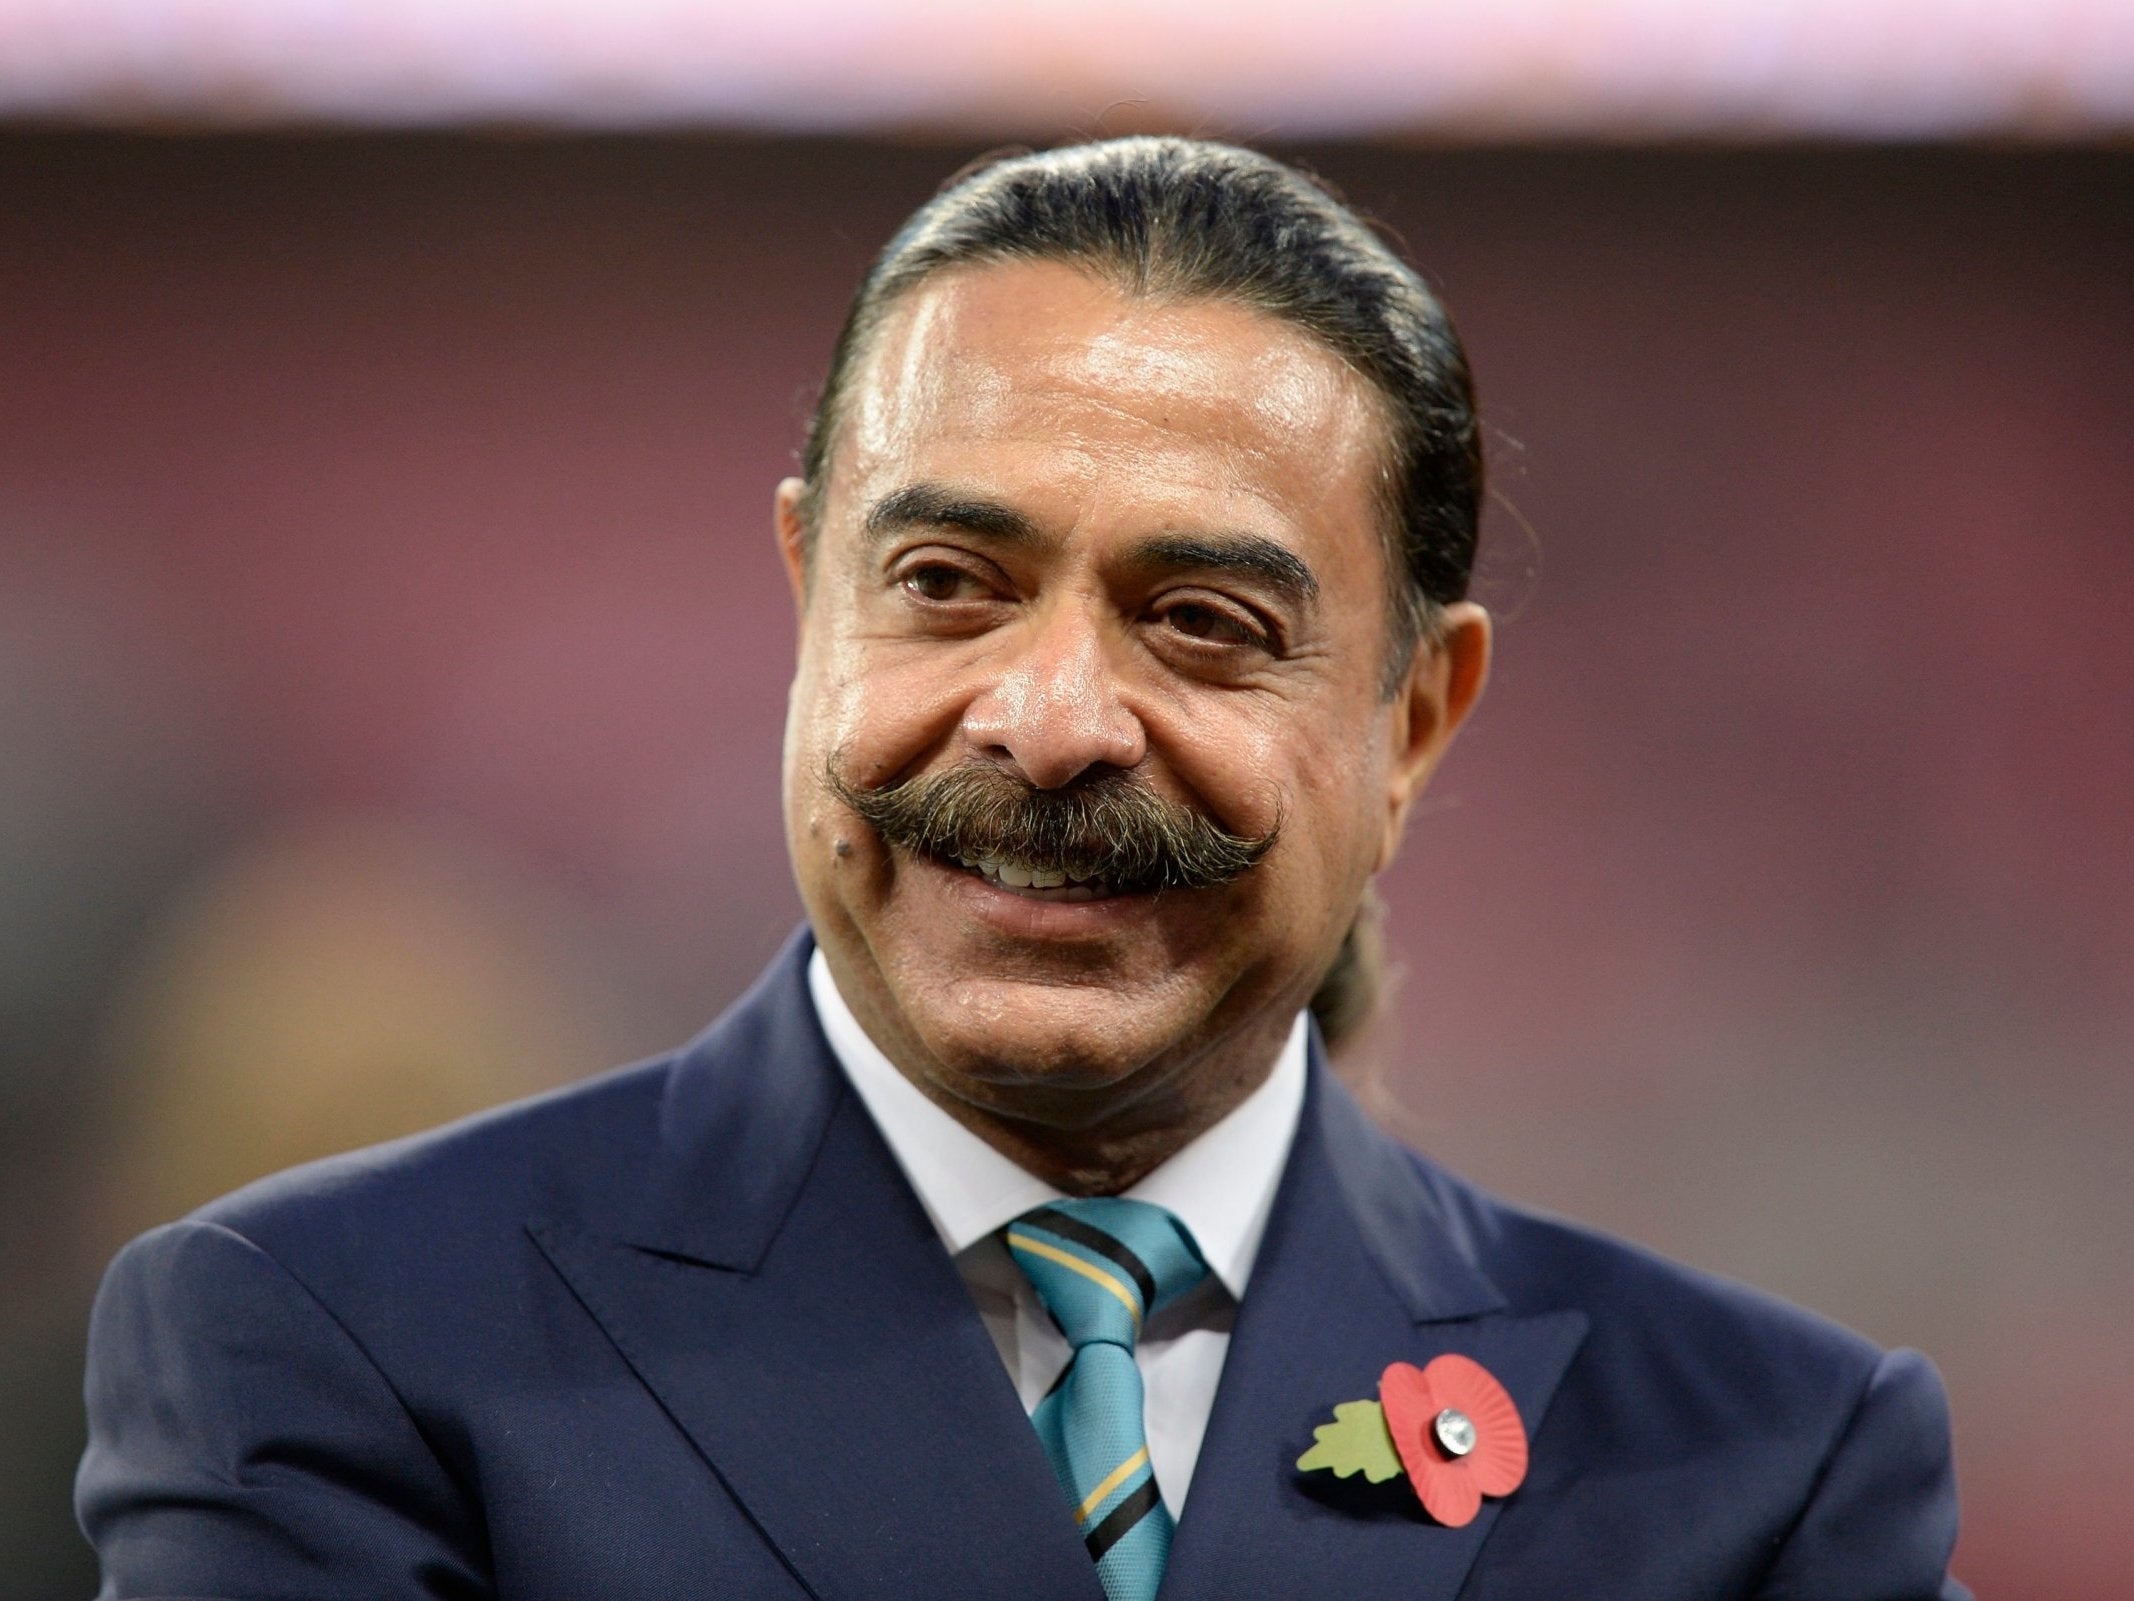 Shahid Khan's plans for Wembley could have a major say on the future of NFL in London